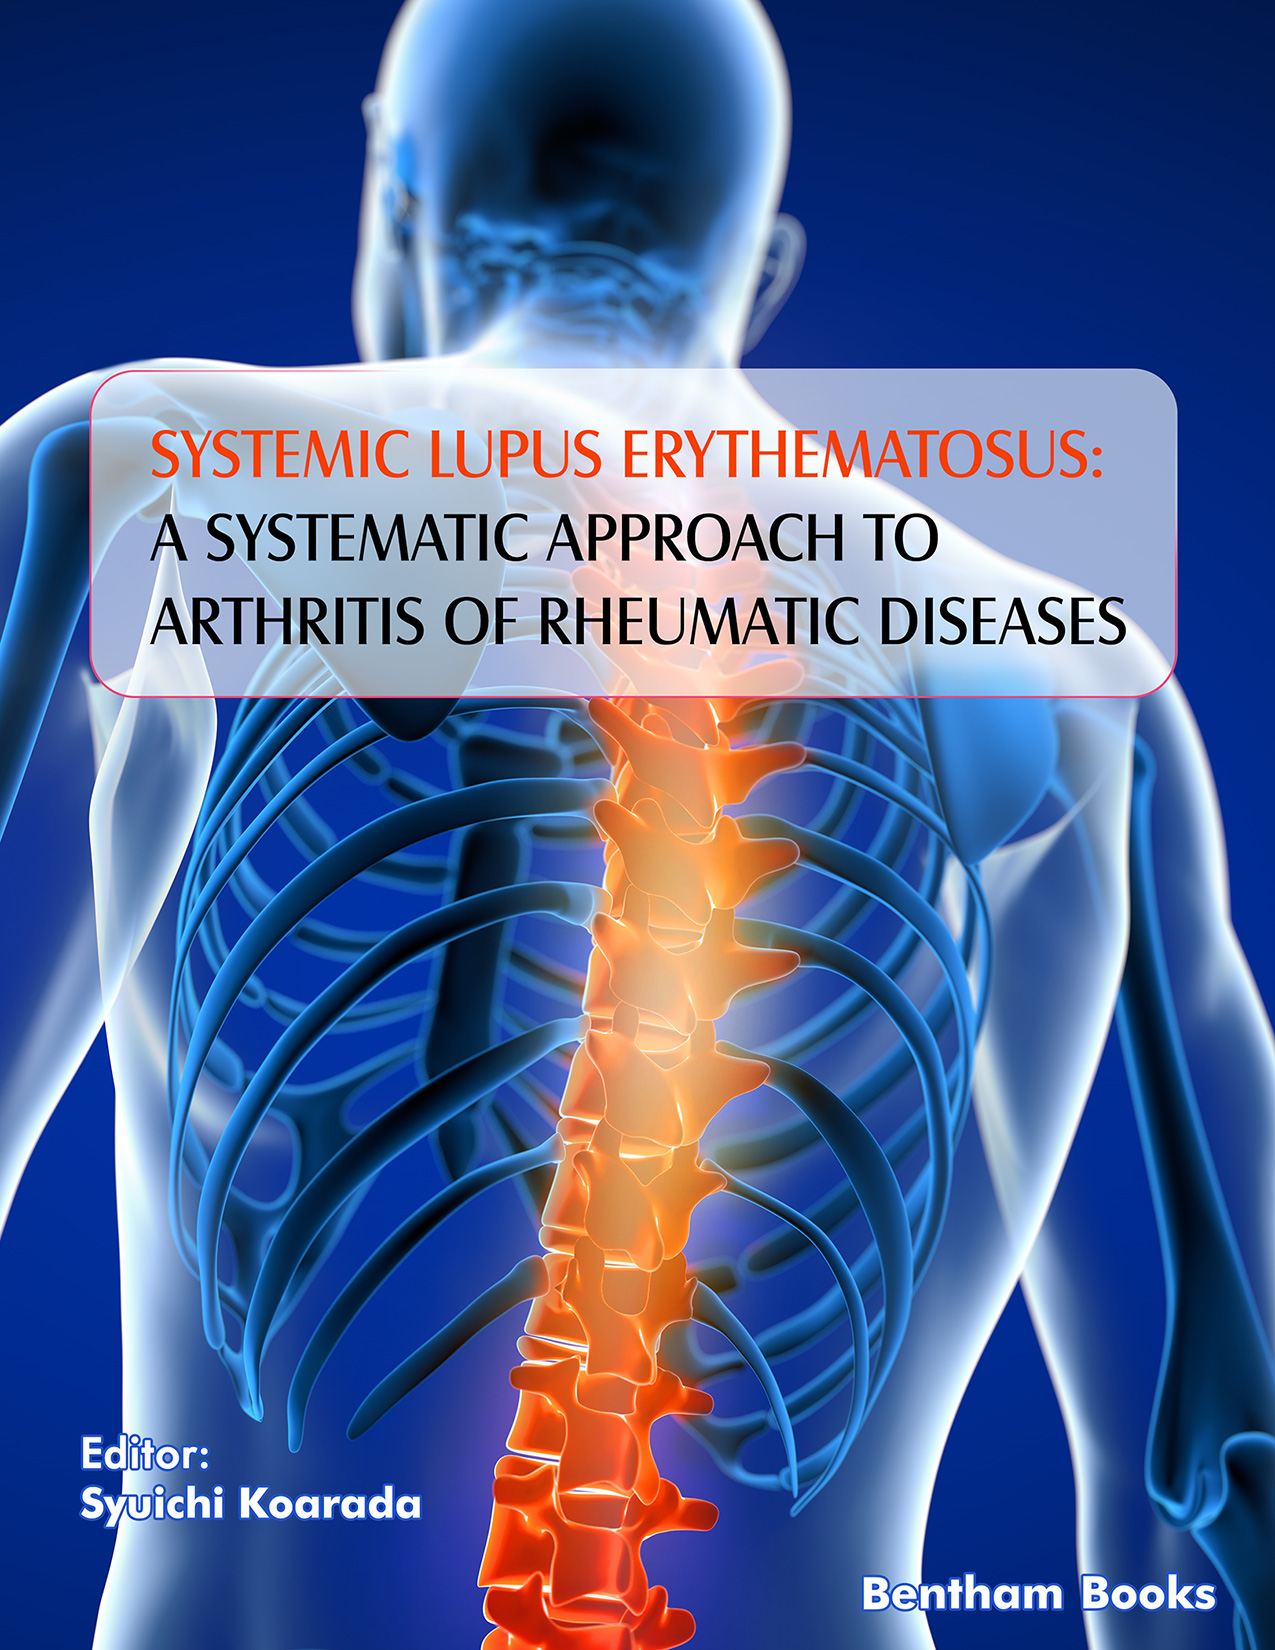 Systemic Lupus Erythematosus: A Systematic Approach to Arthritis of Rheumatic Diseases